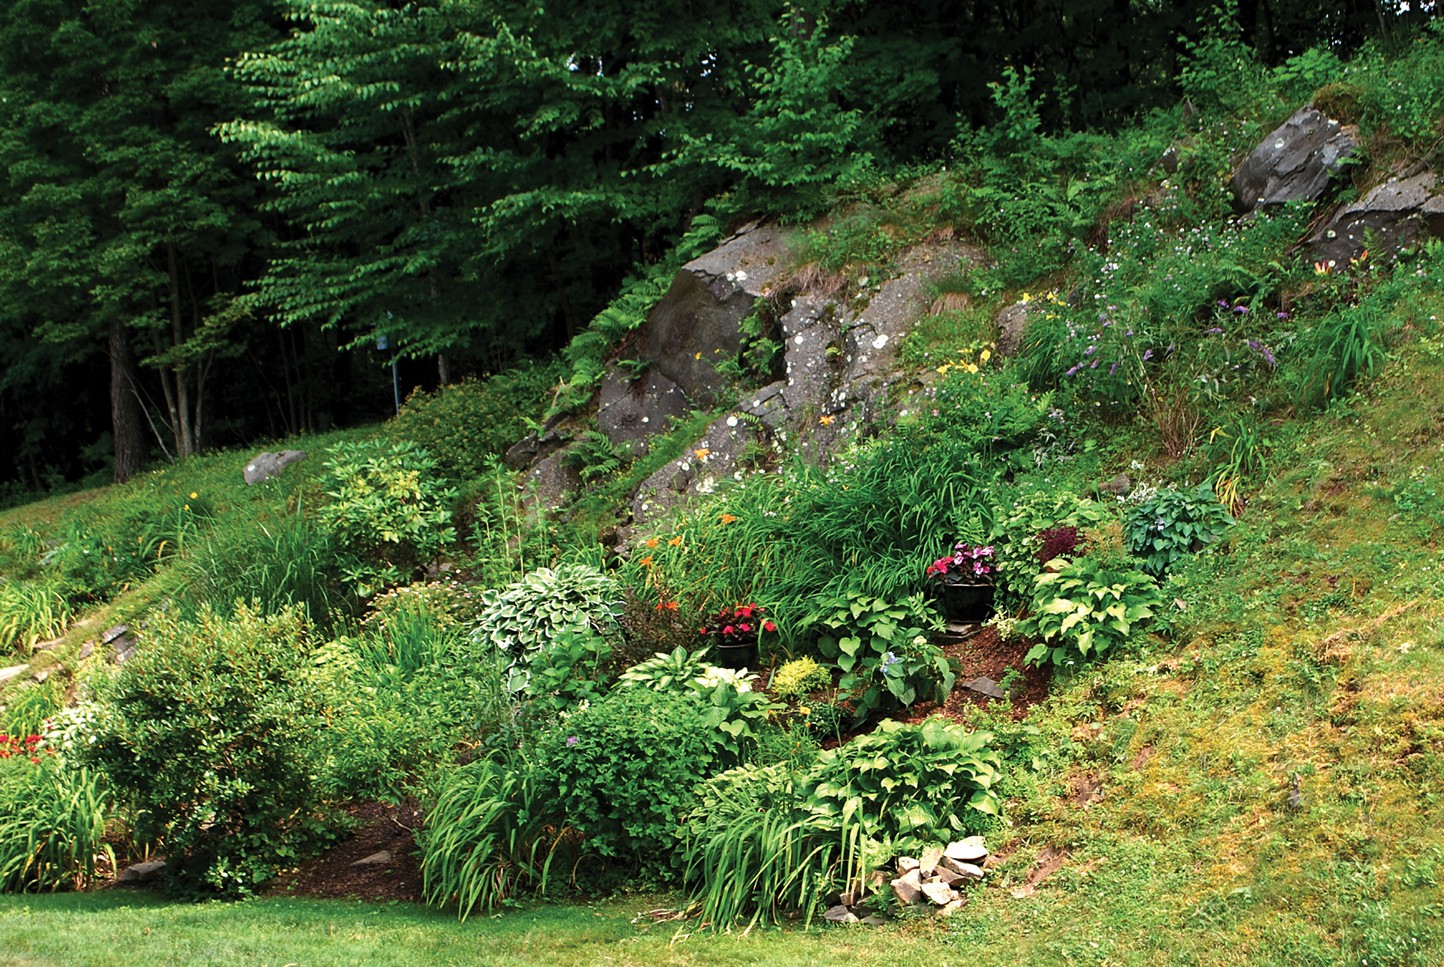 Top 5 Ways to Deal With Steep Slopes In Your Yard